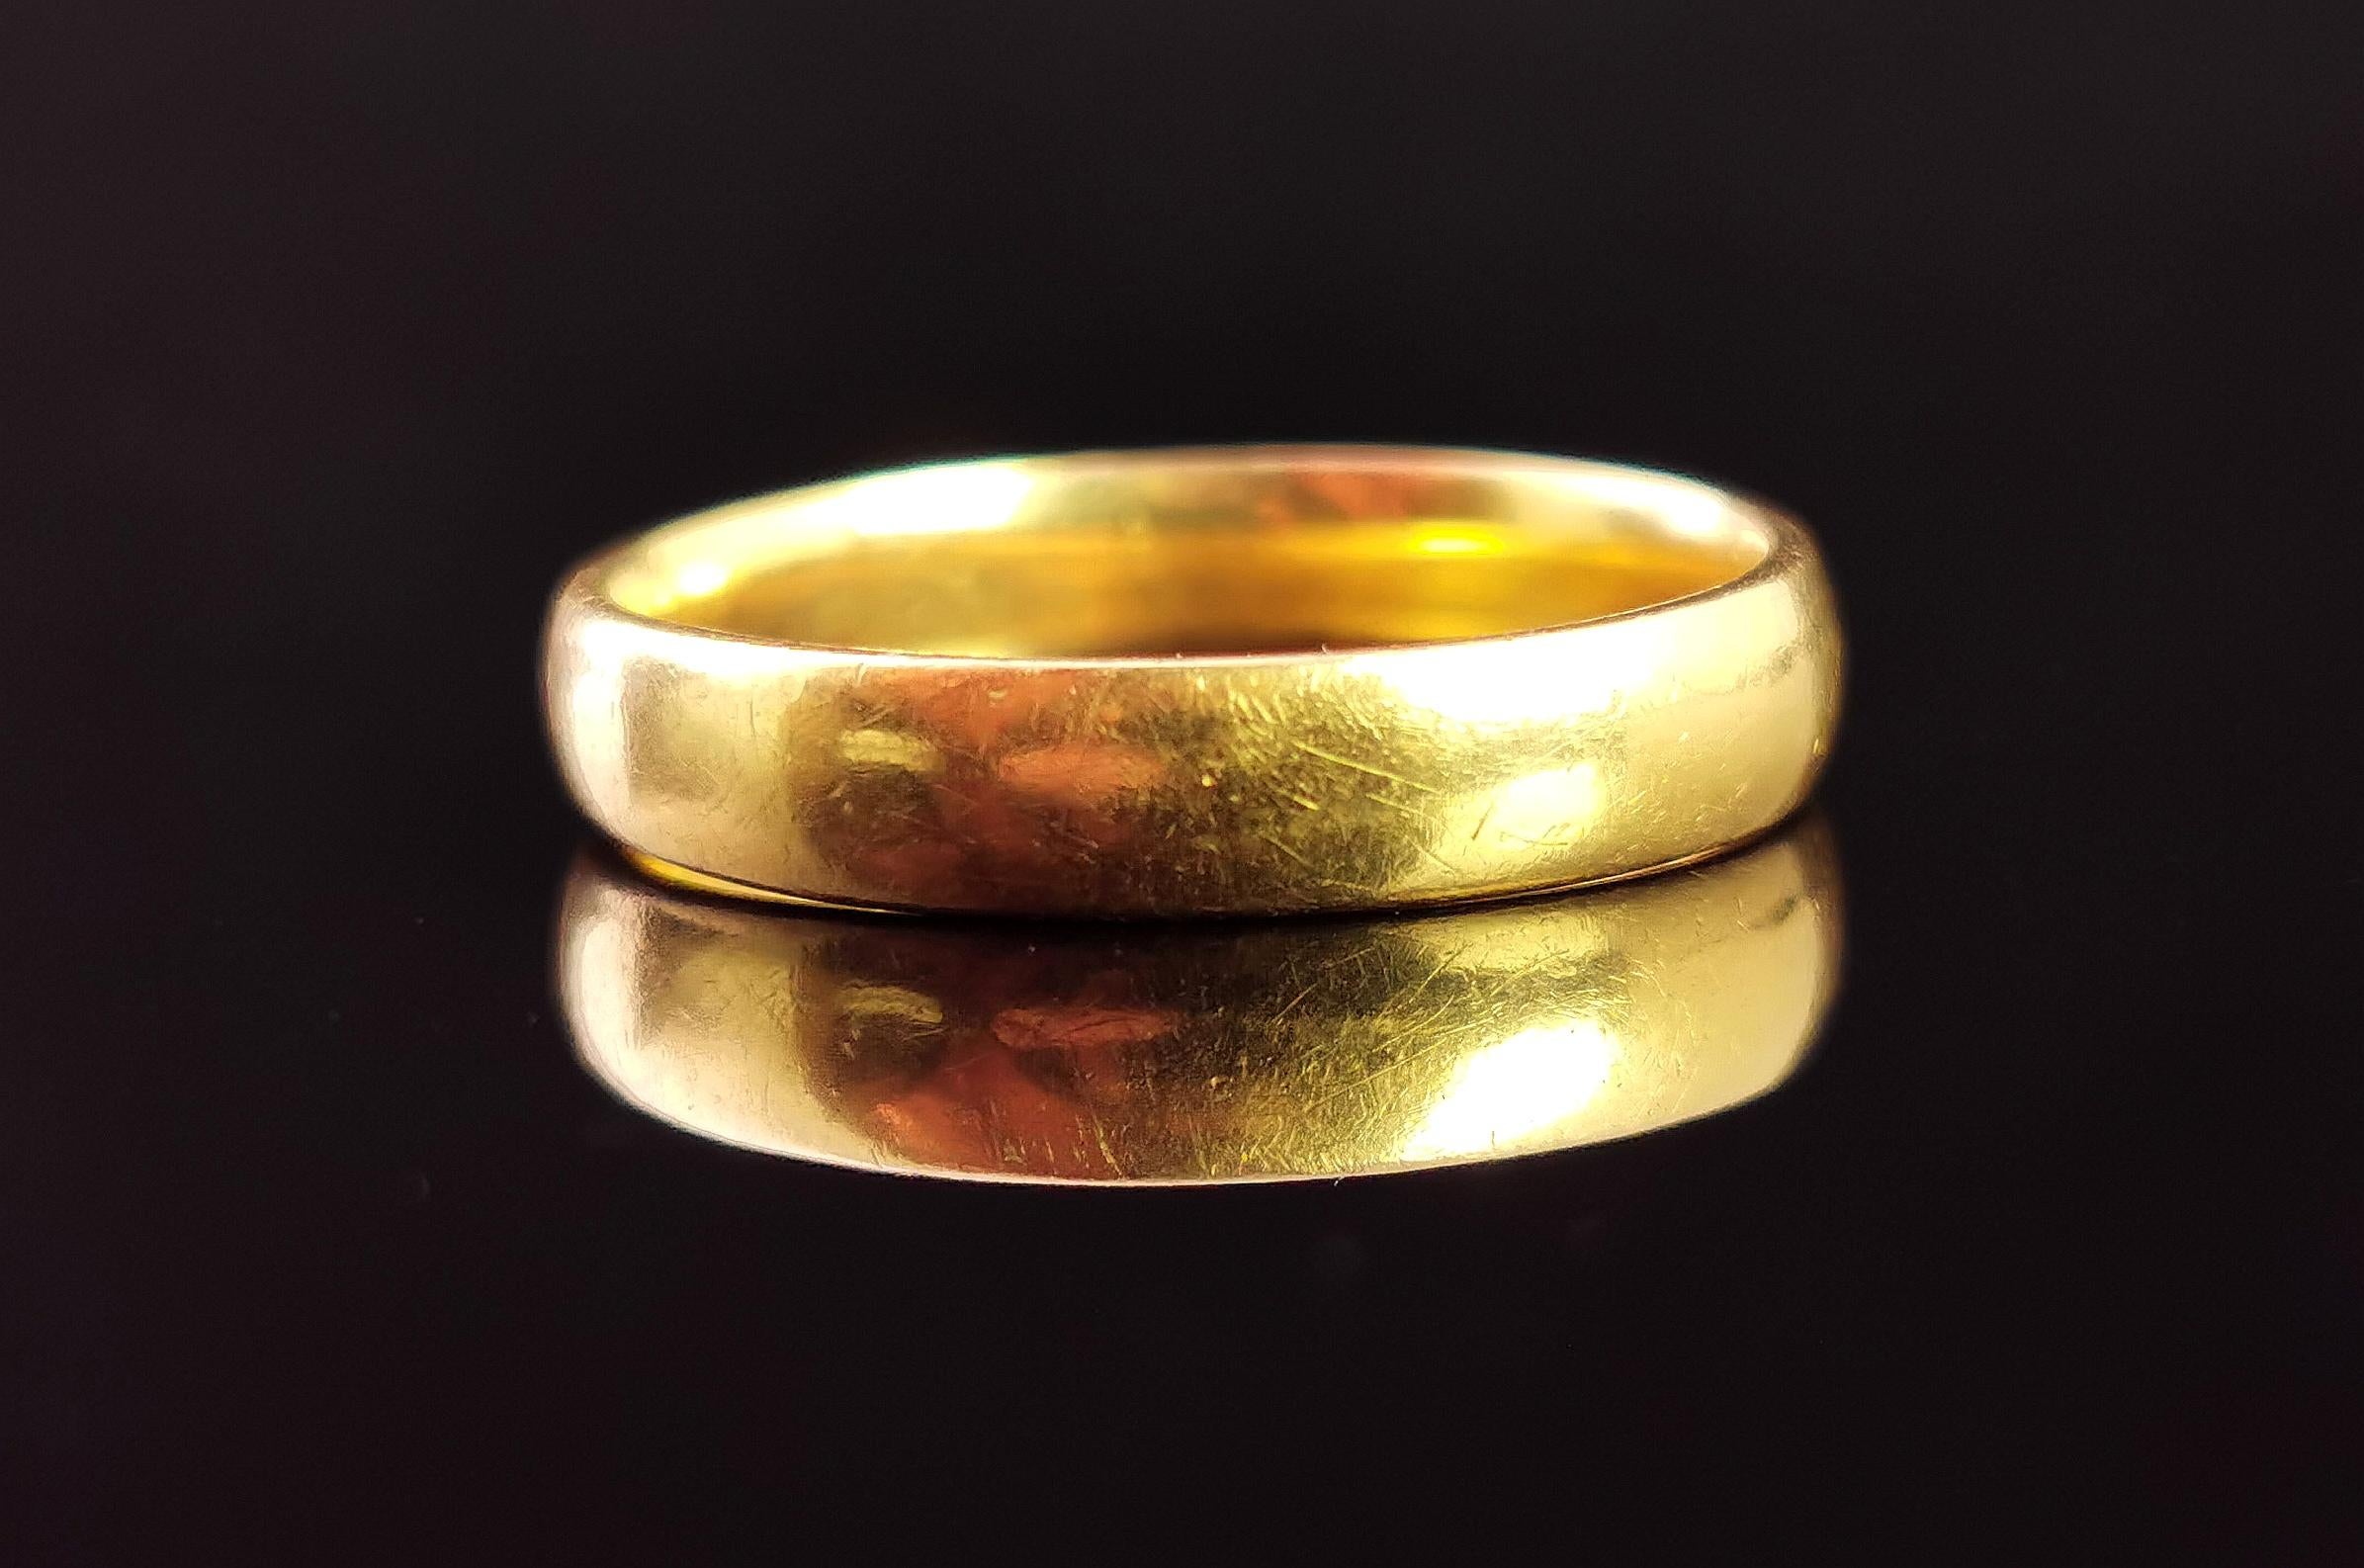 A gorgeous, early Art Deco era 22ct gold band ring or wedding ring.

Rich, warm, buttery golden 22ct yellow gold, this lovely hue is only ever found on antique gold and it is so rich and unique.

It has a soft D profile and it has a good weight to